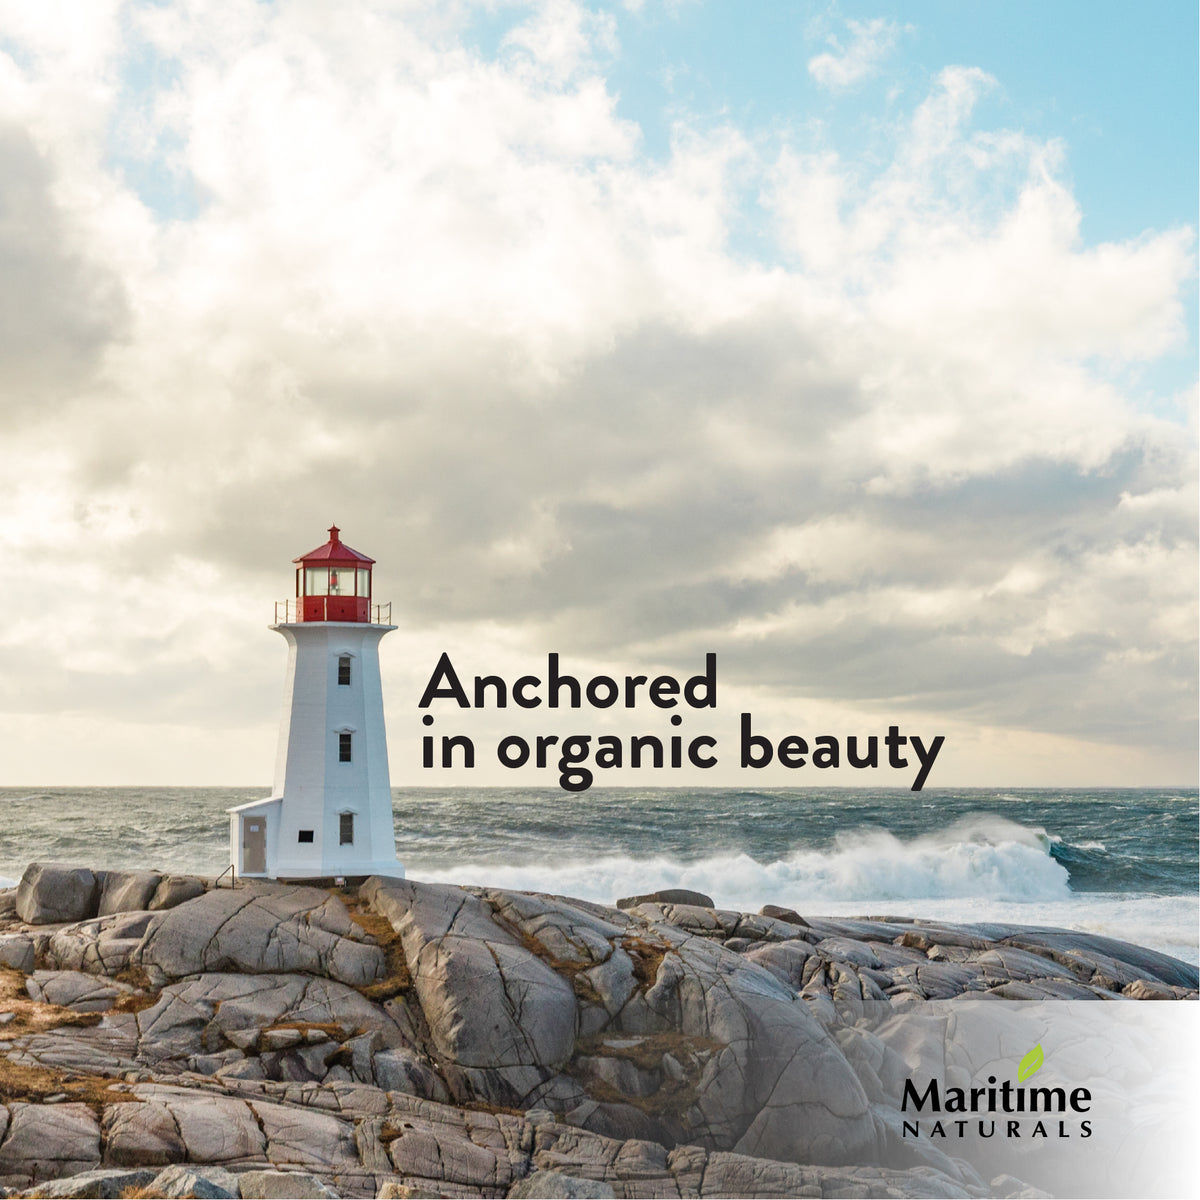 Maritime Naturals is Anchored in Organic Beauty